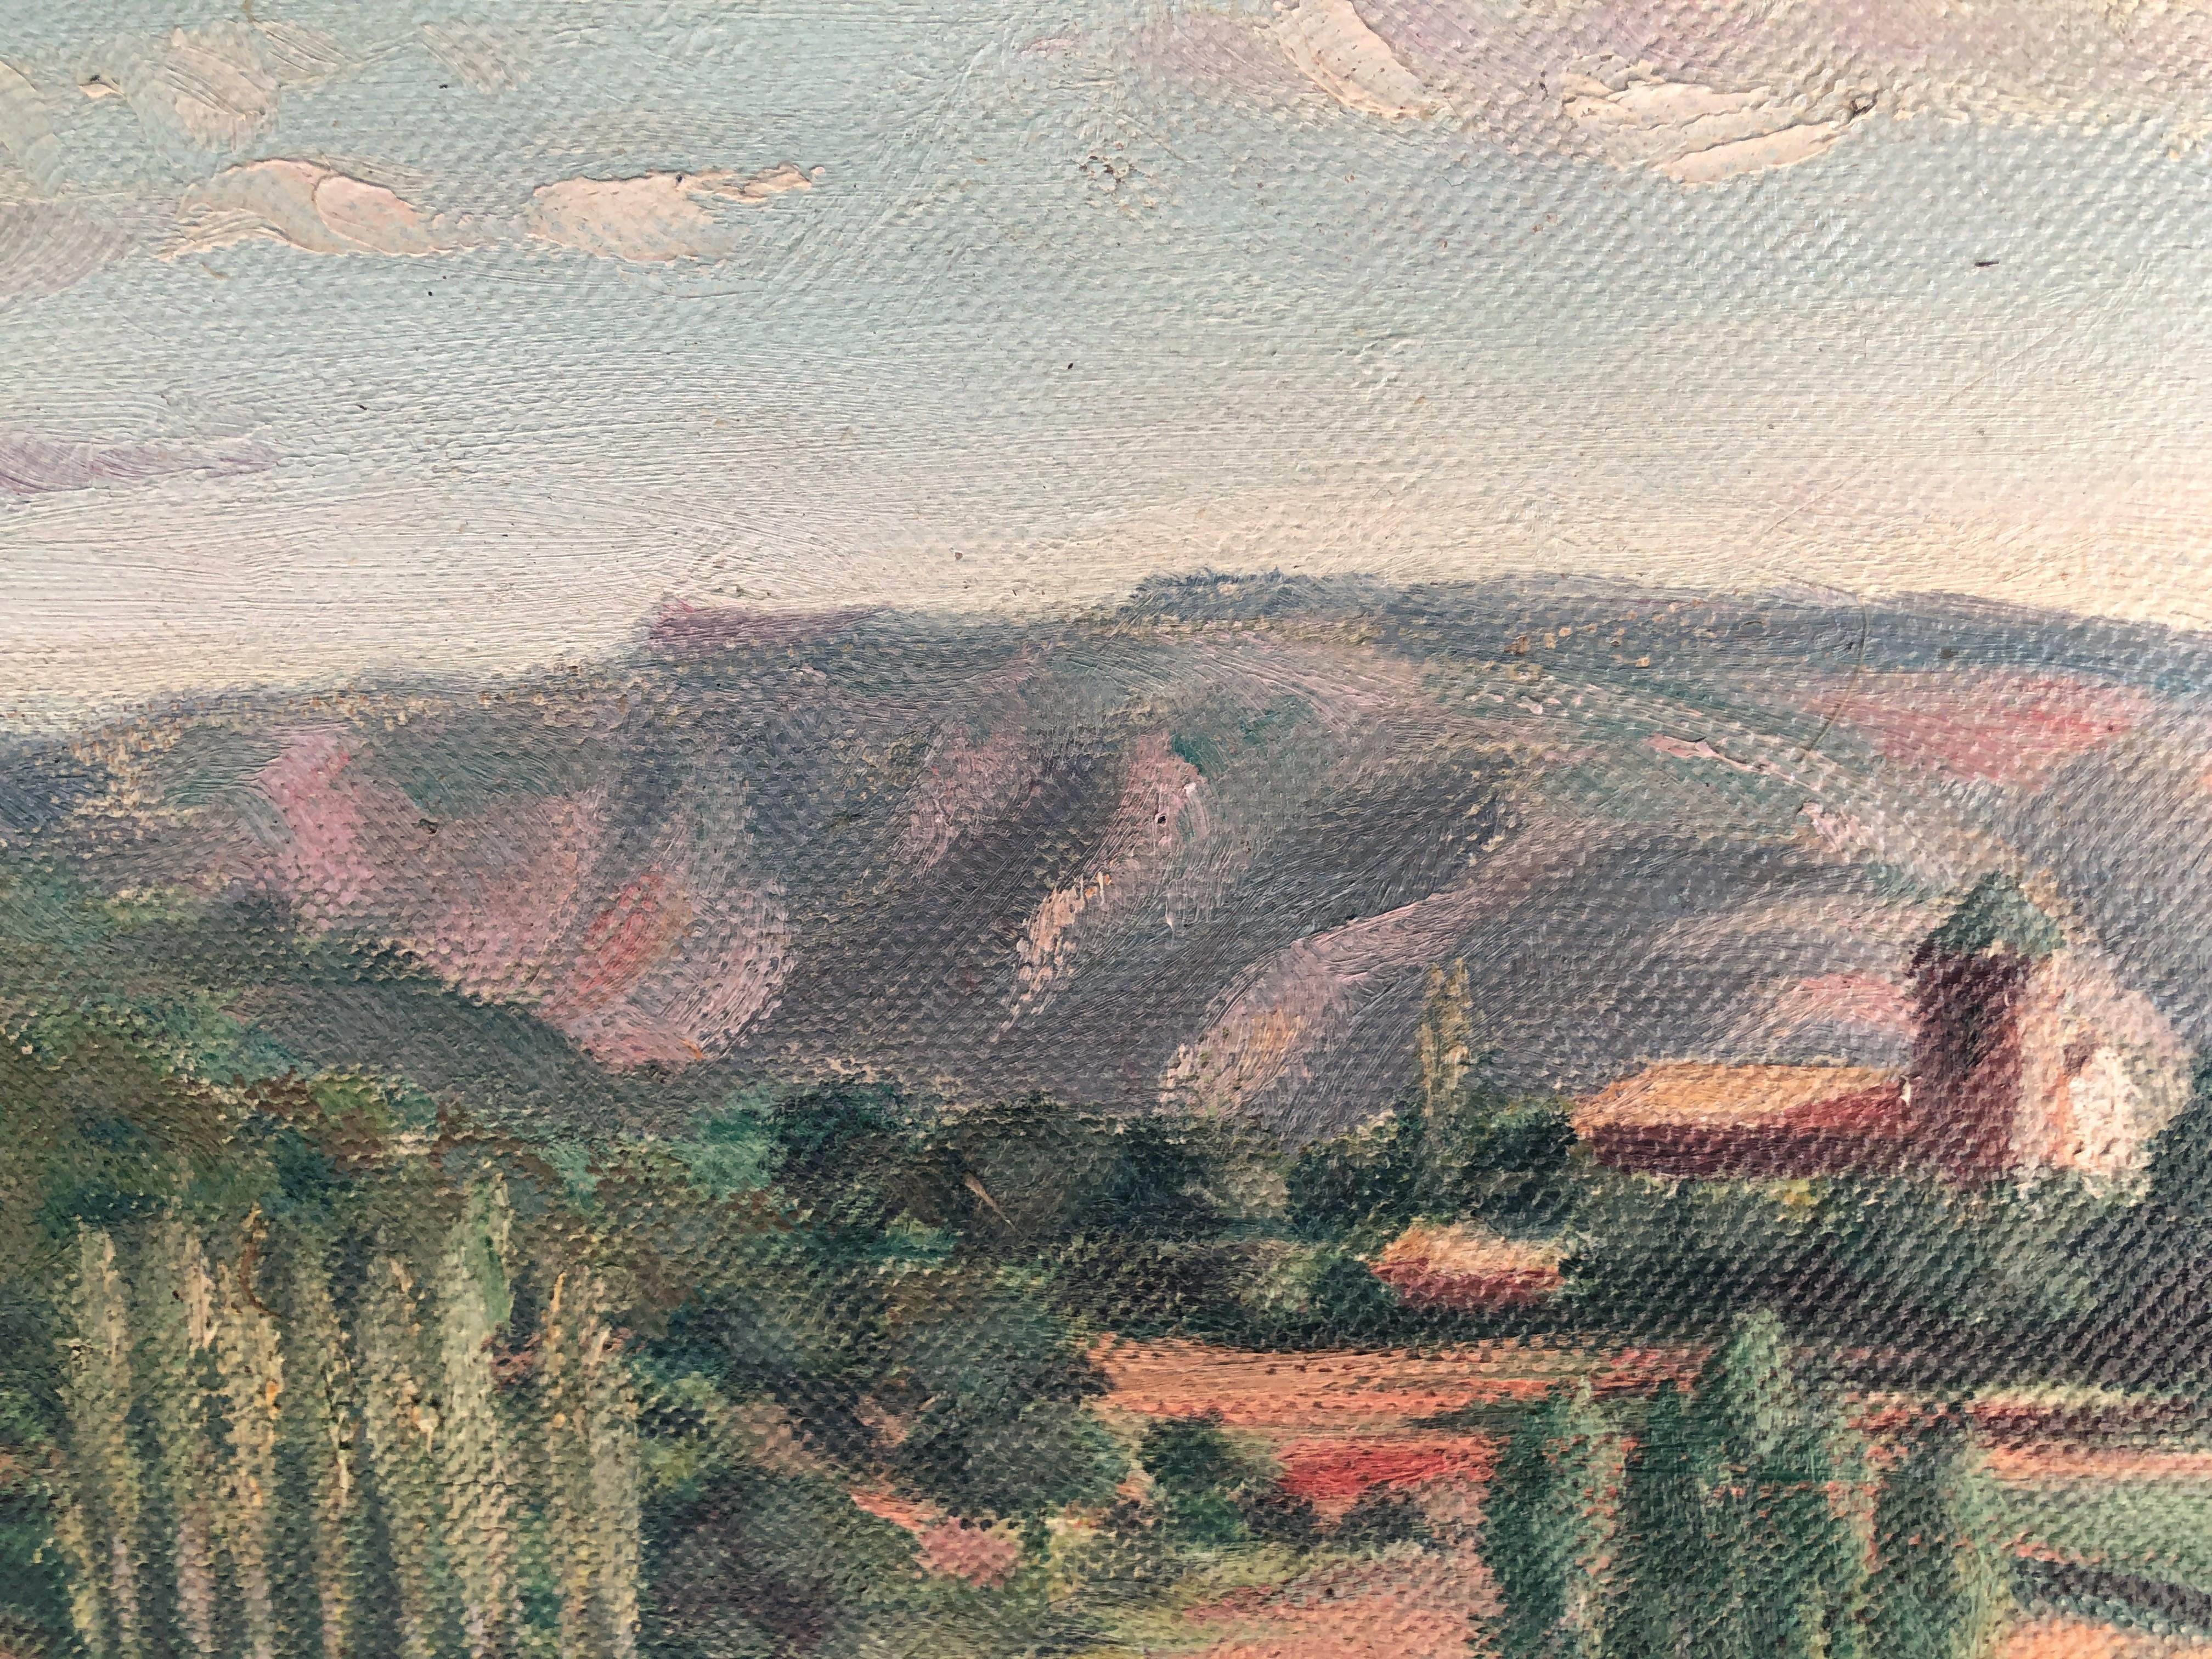 XX century Spanish school oil on burlap painting landscape - Post-War Painting by Unknown